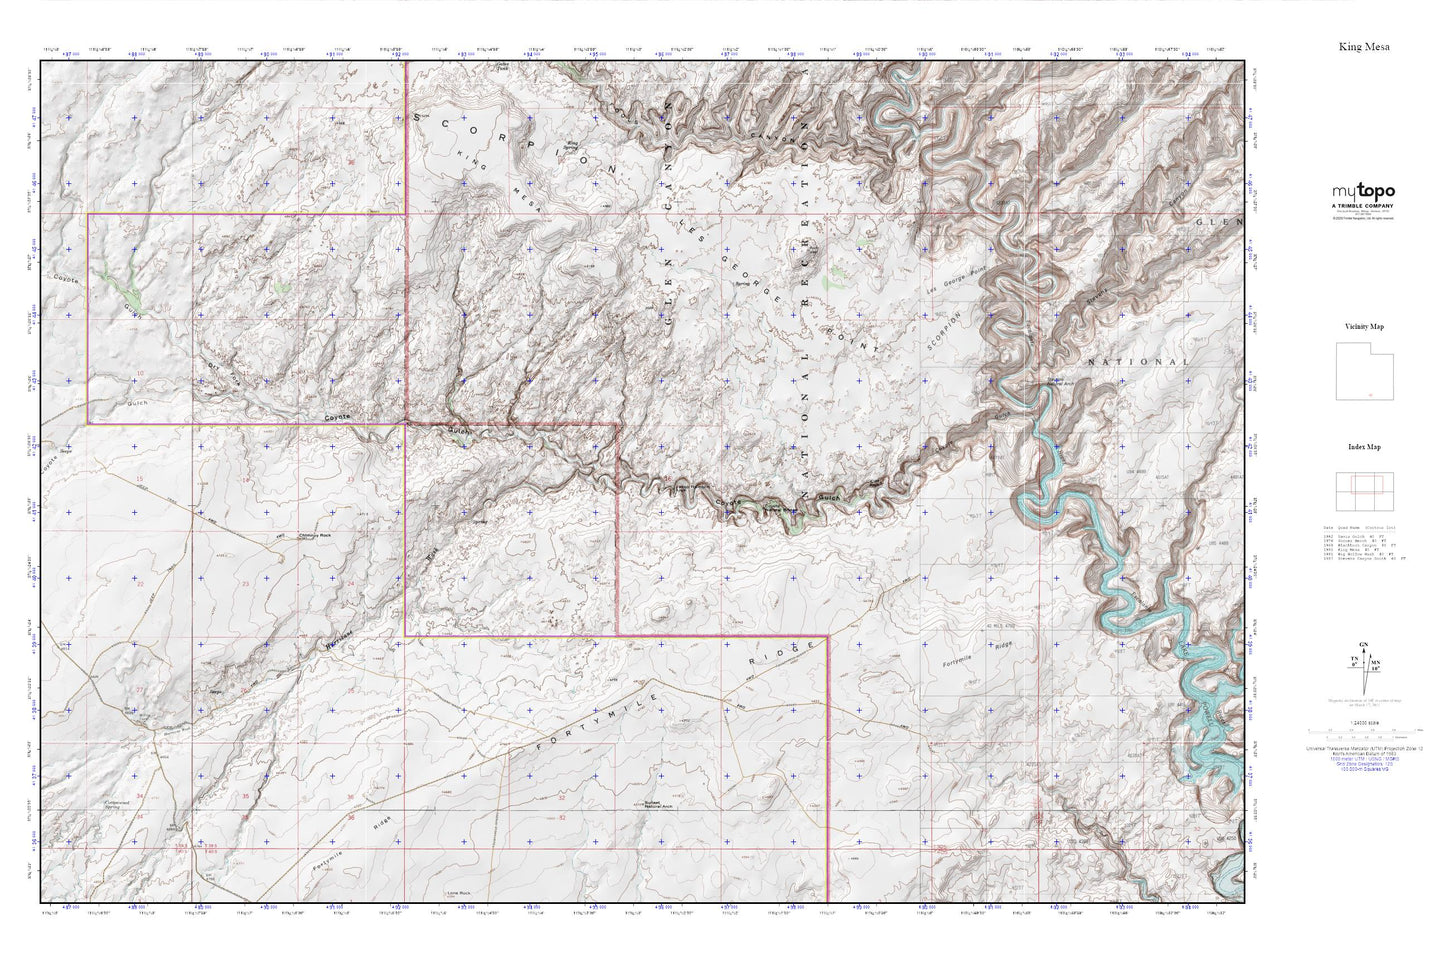 Coyote Gulch MyTopo Explorer Series Map Image